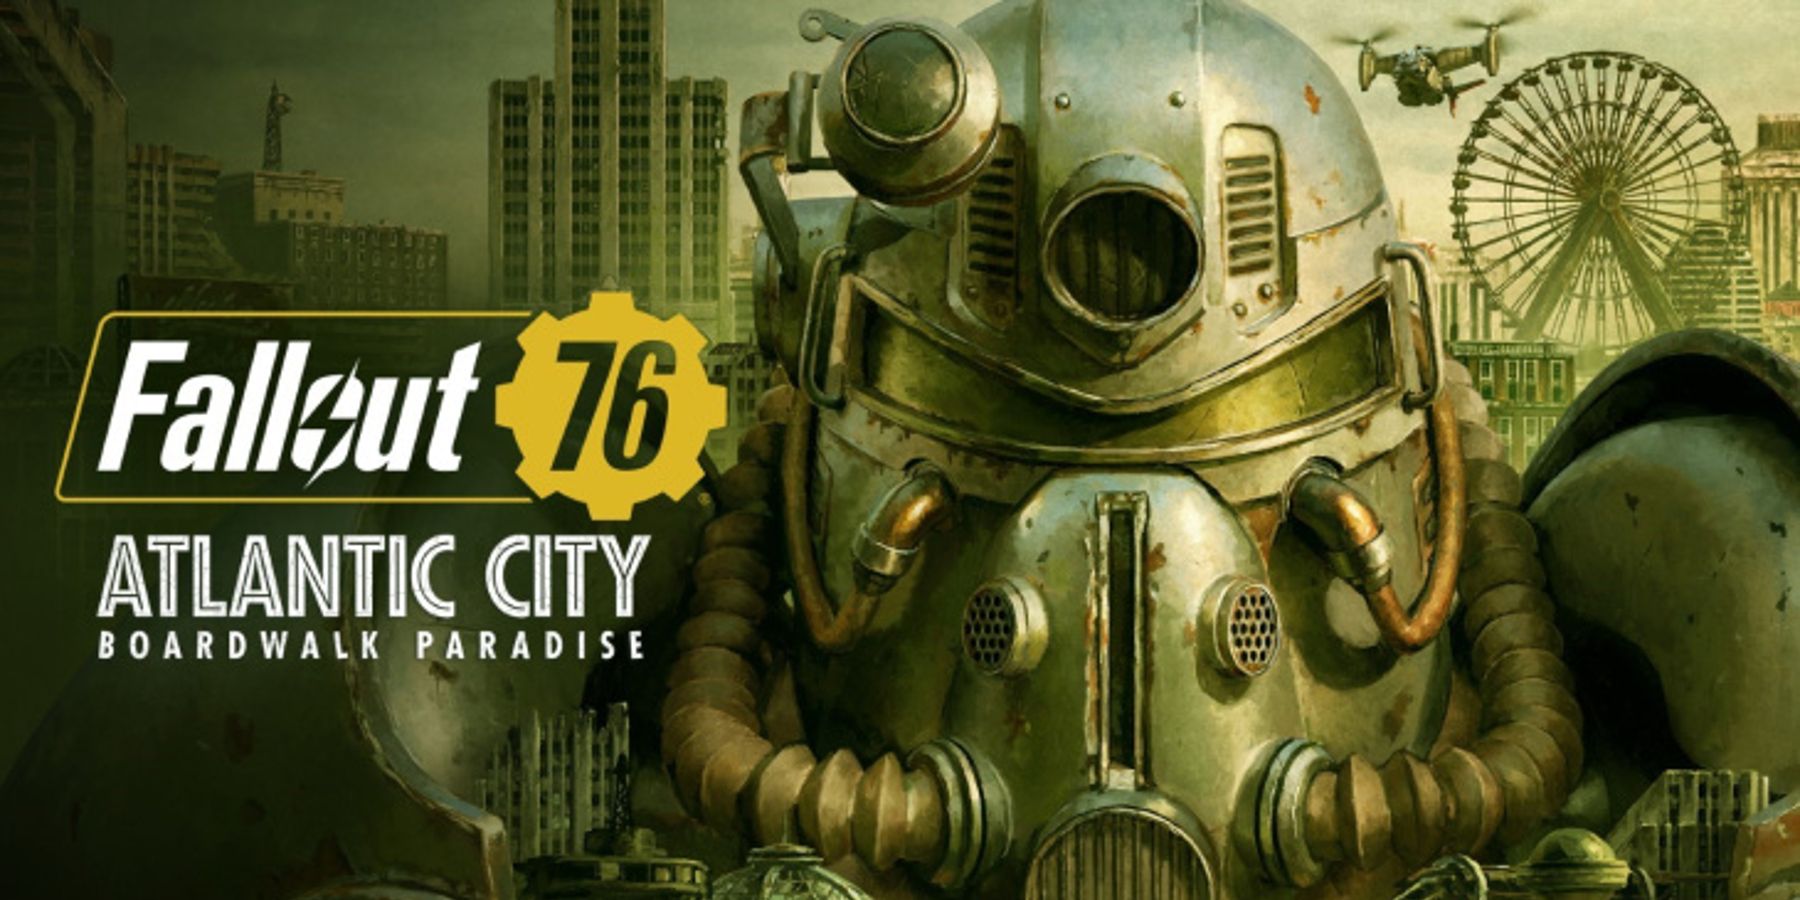 Fallout 76 Atlantic City Update part one promotional material